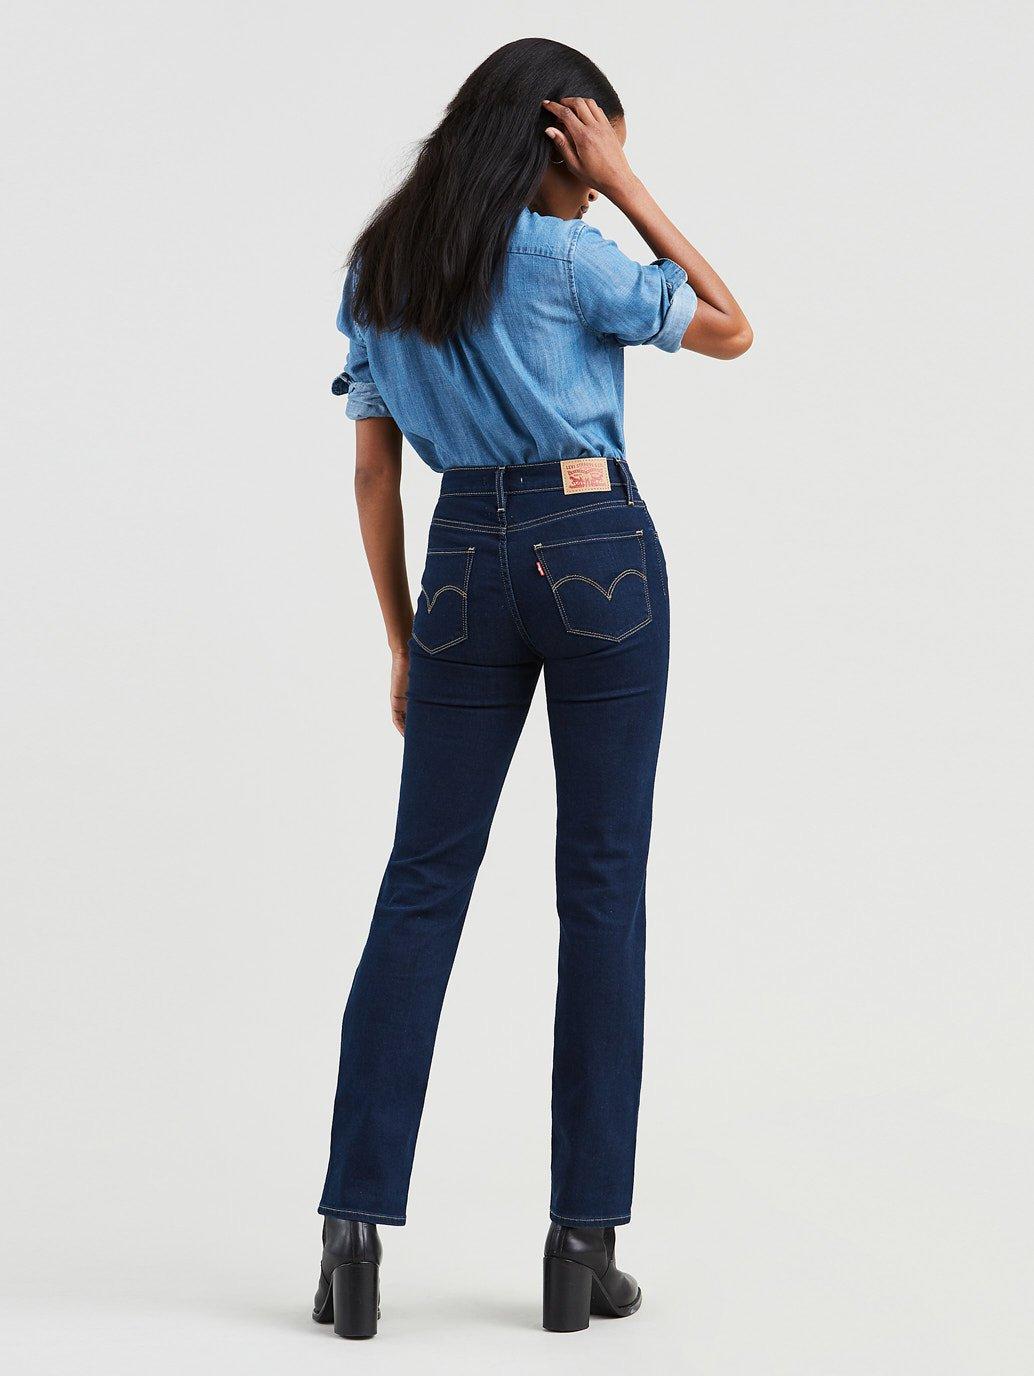 Buy Levi's® Women's 724 High-Rise Straight Jeans| Levi’s® Official ...